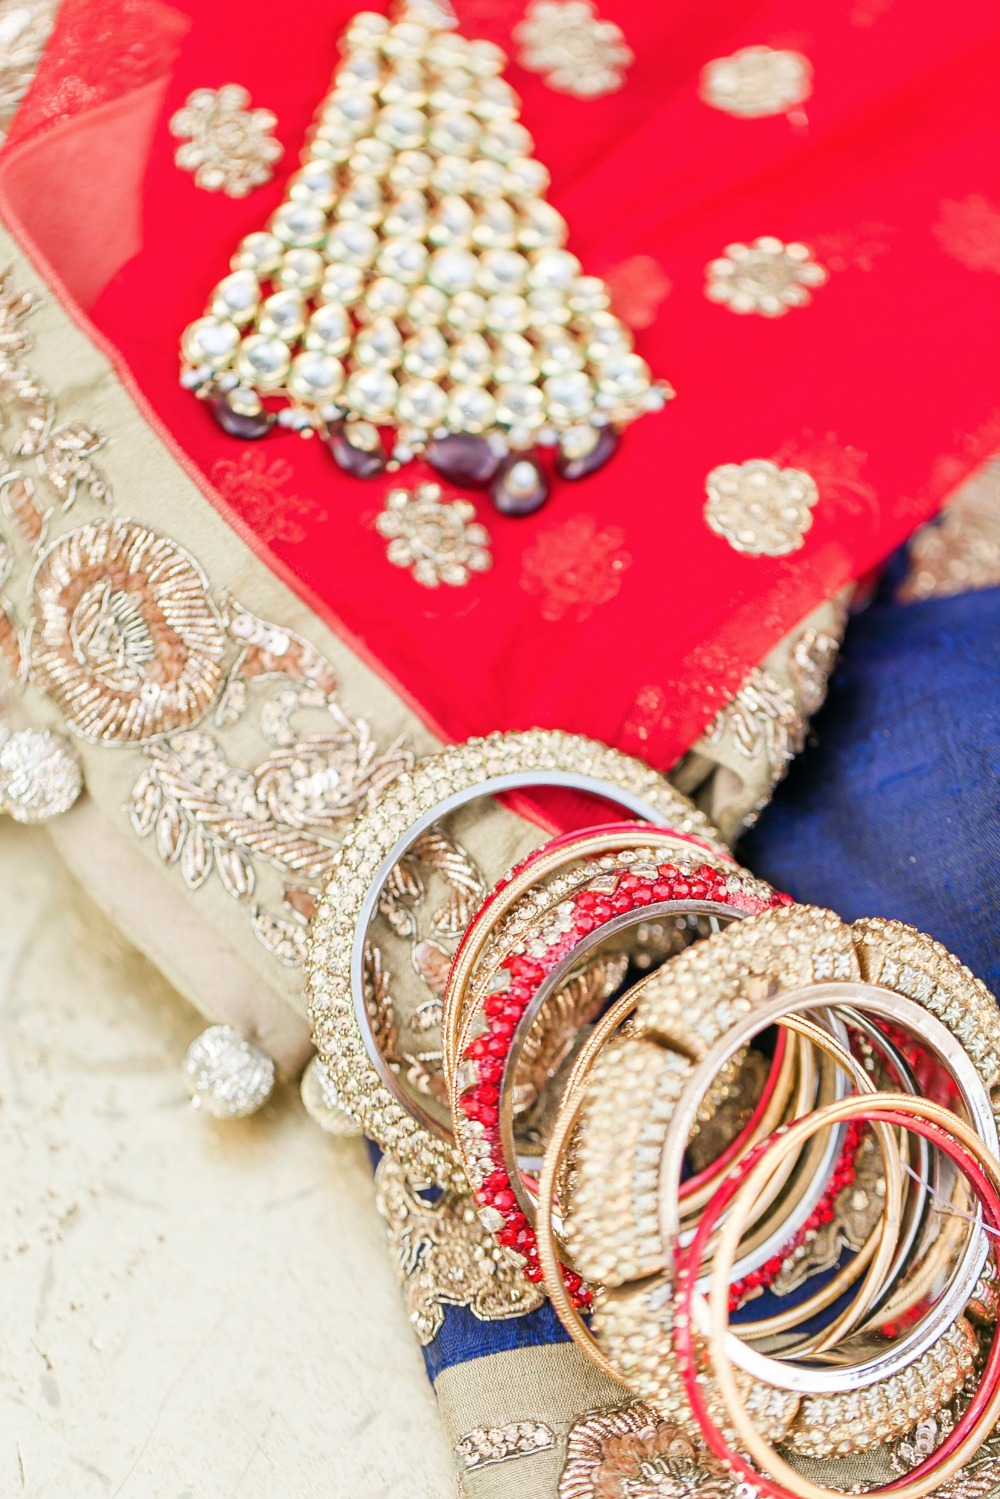 Bridal jewelry and details